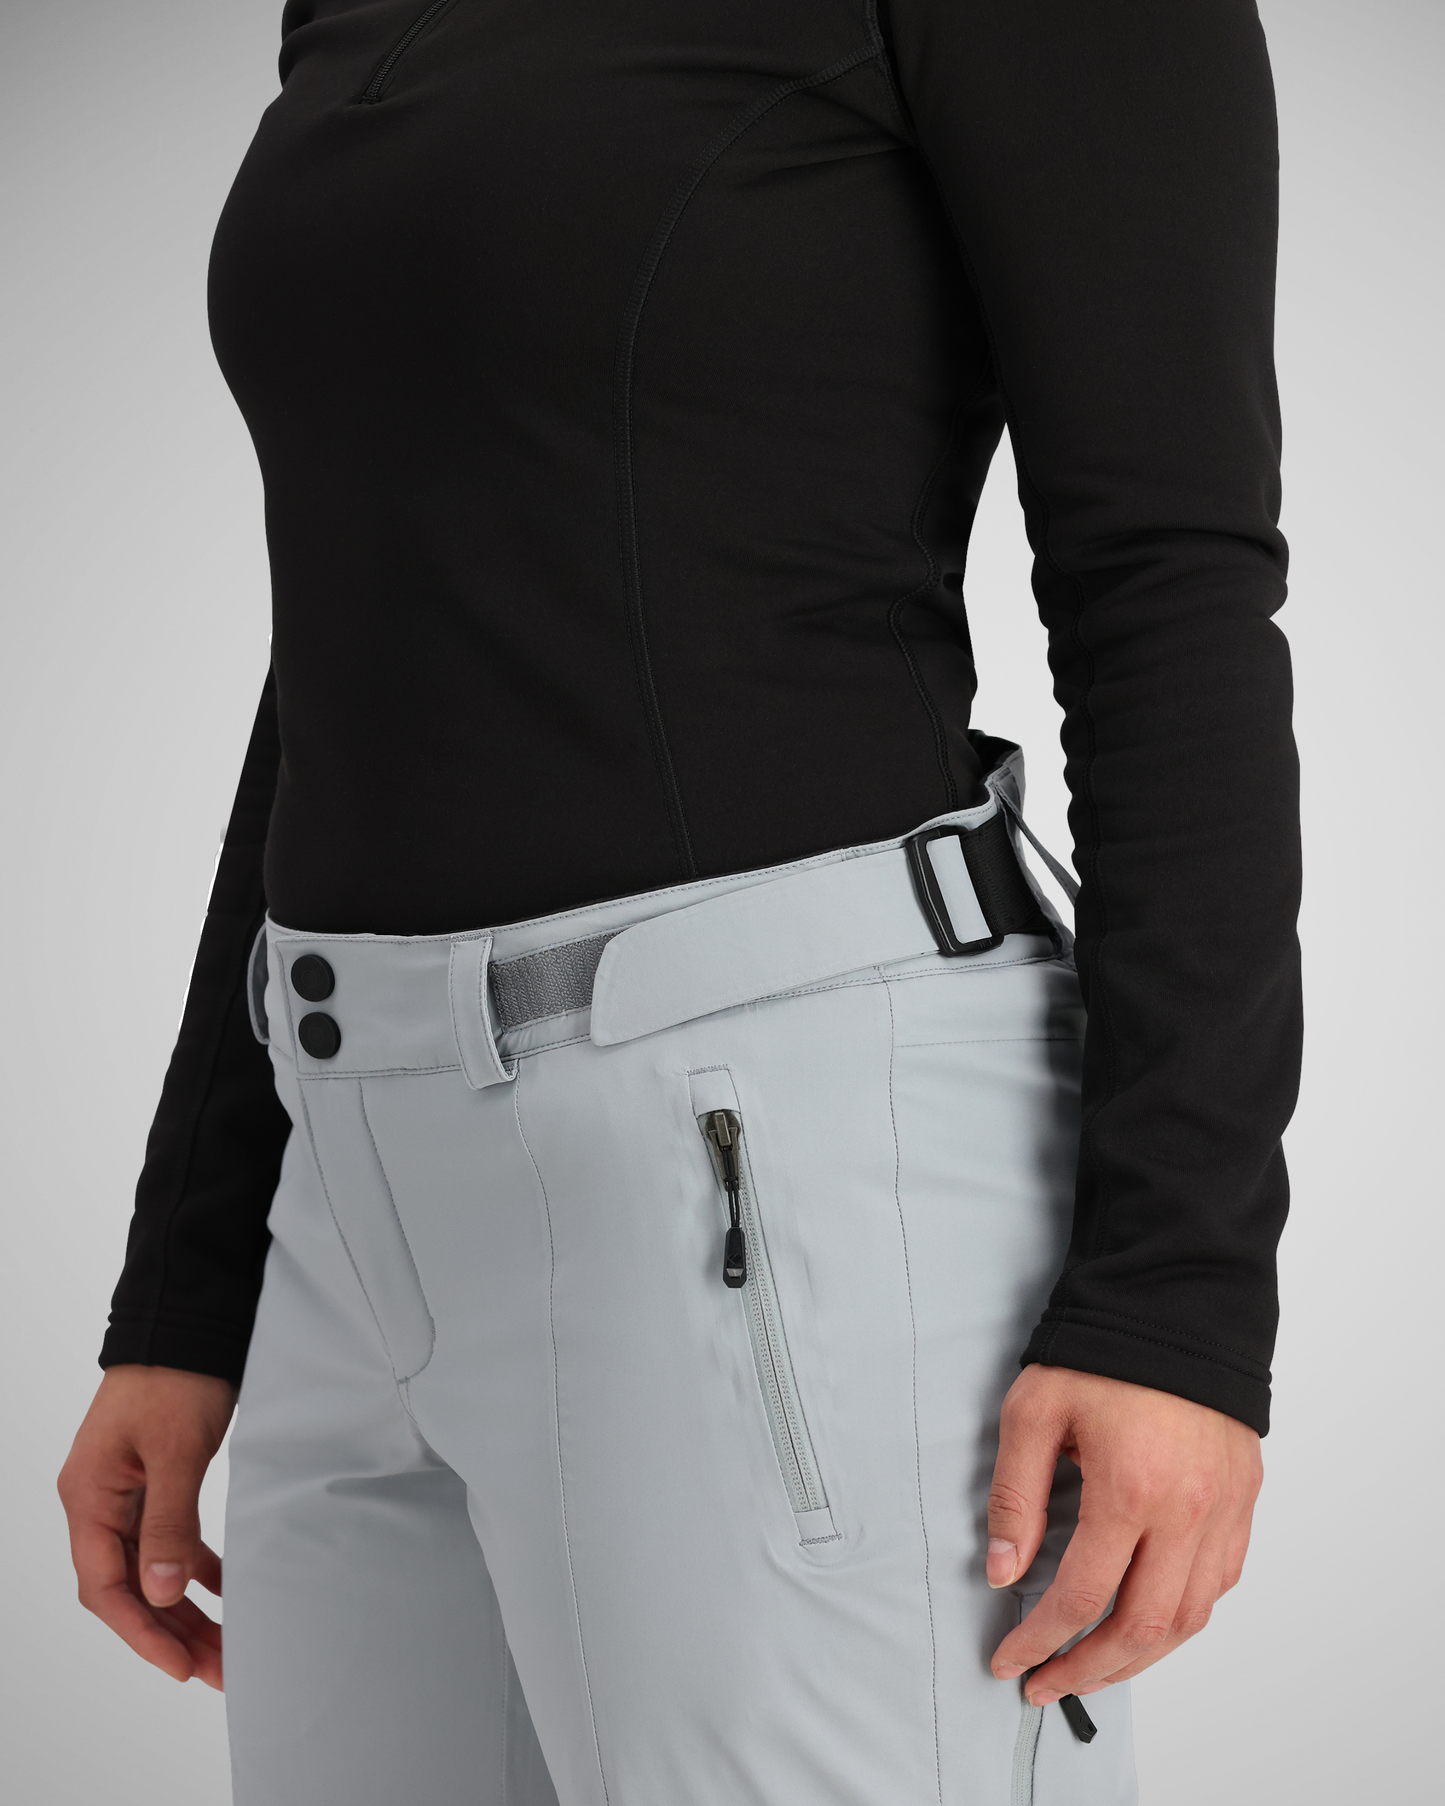 Adjustable Waist | Precision fit to keep your pants exactly where you need them.